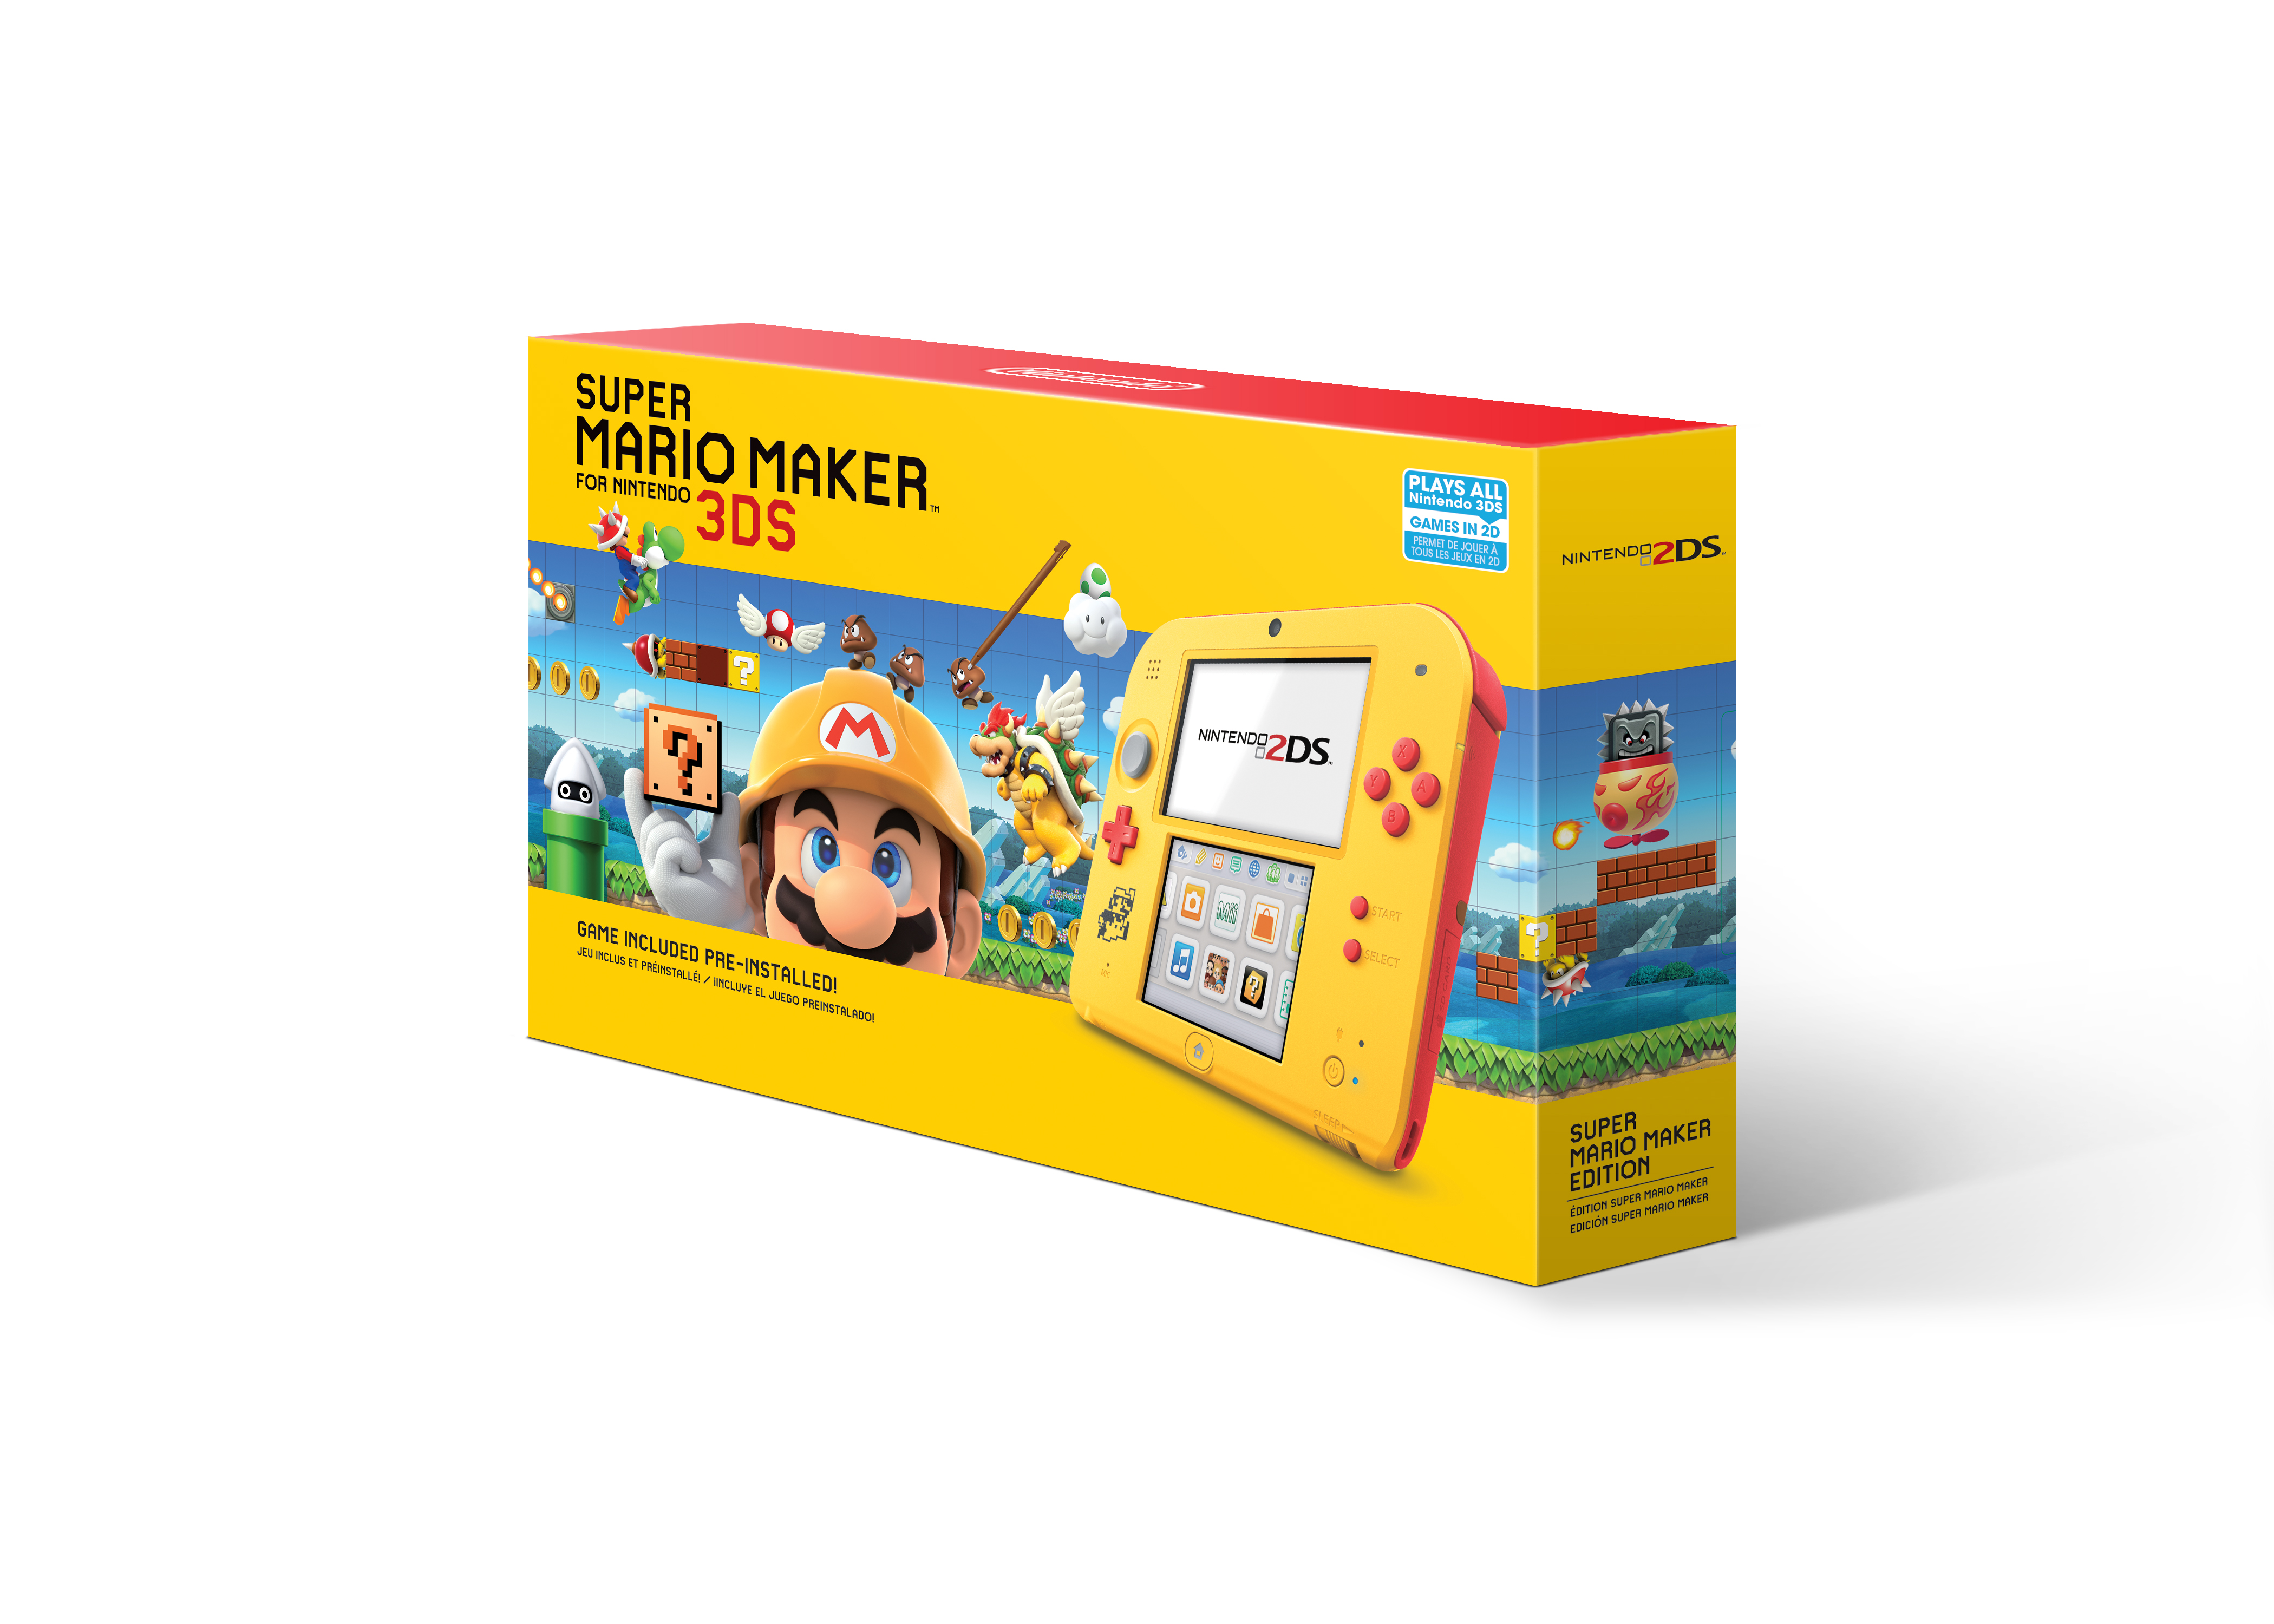 Nintendo 2DS System with Super Mario Maker (Pre-Installed), Yellow / Red, FTRSYBDW - image 2 of 7